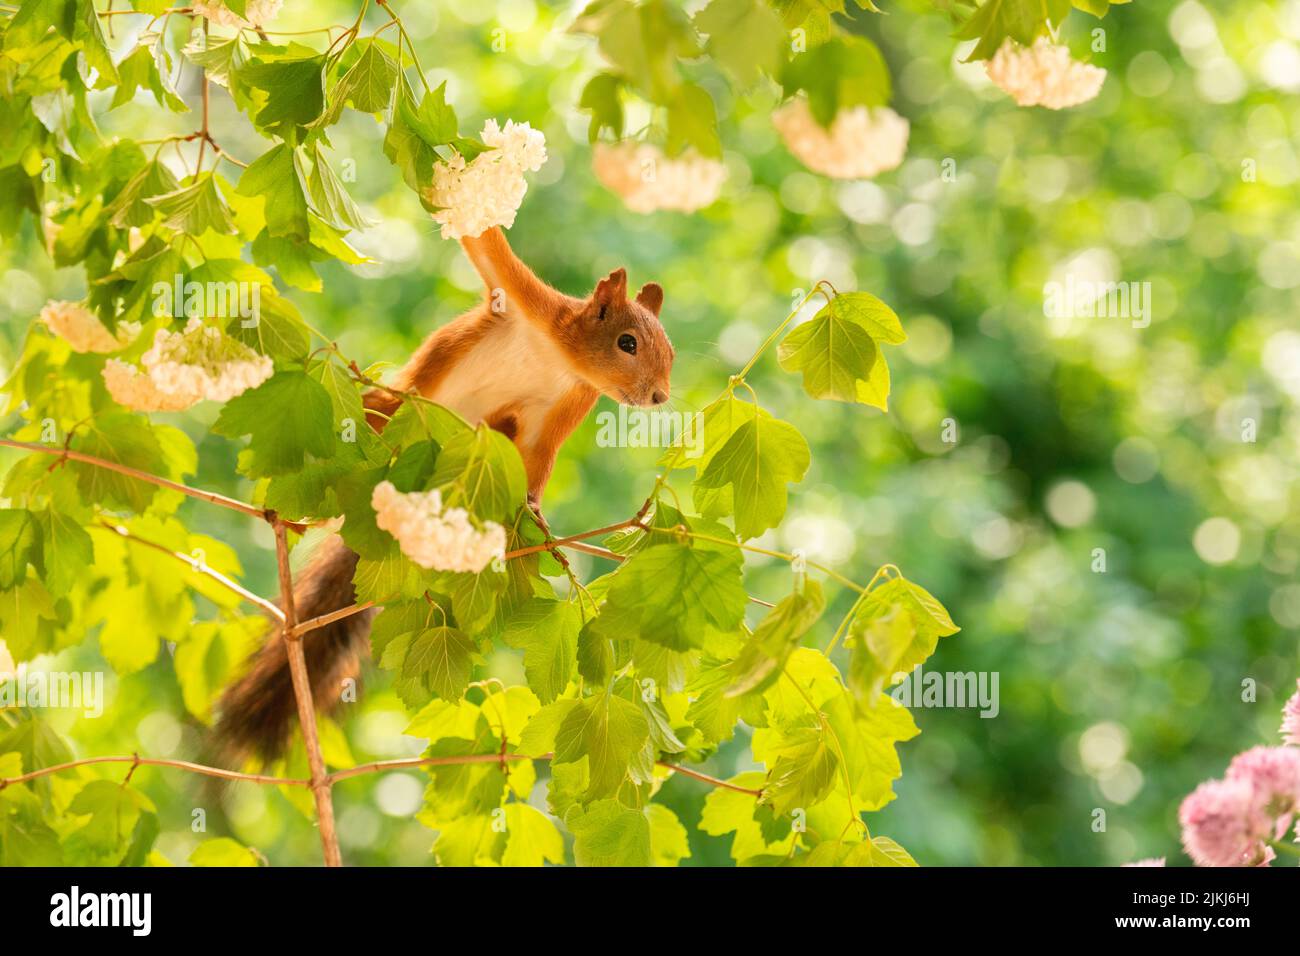 Red Squirrel on snowball tree branches with flowers Stock Photo